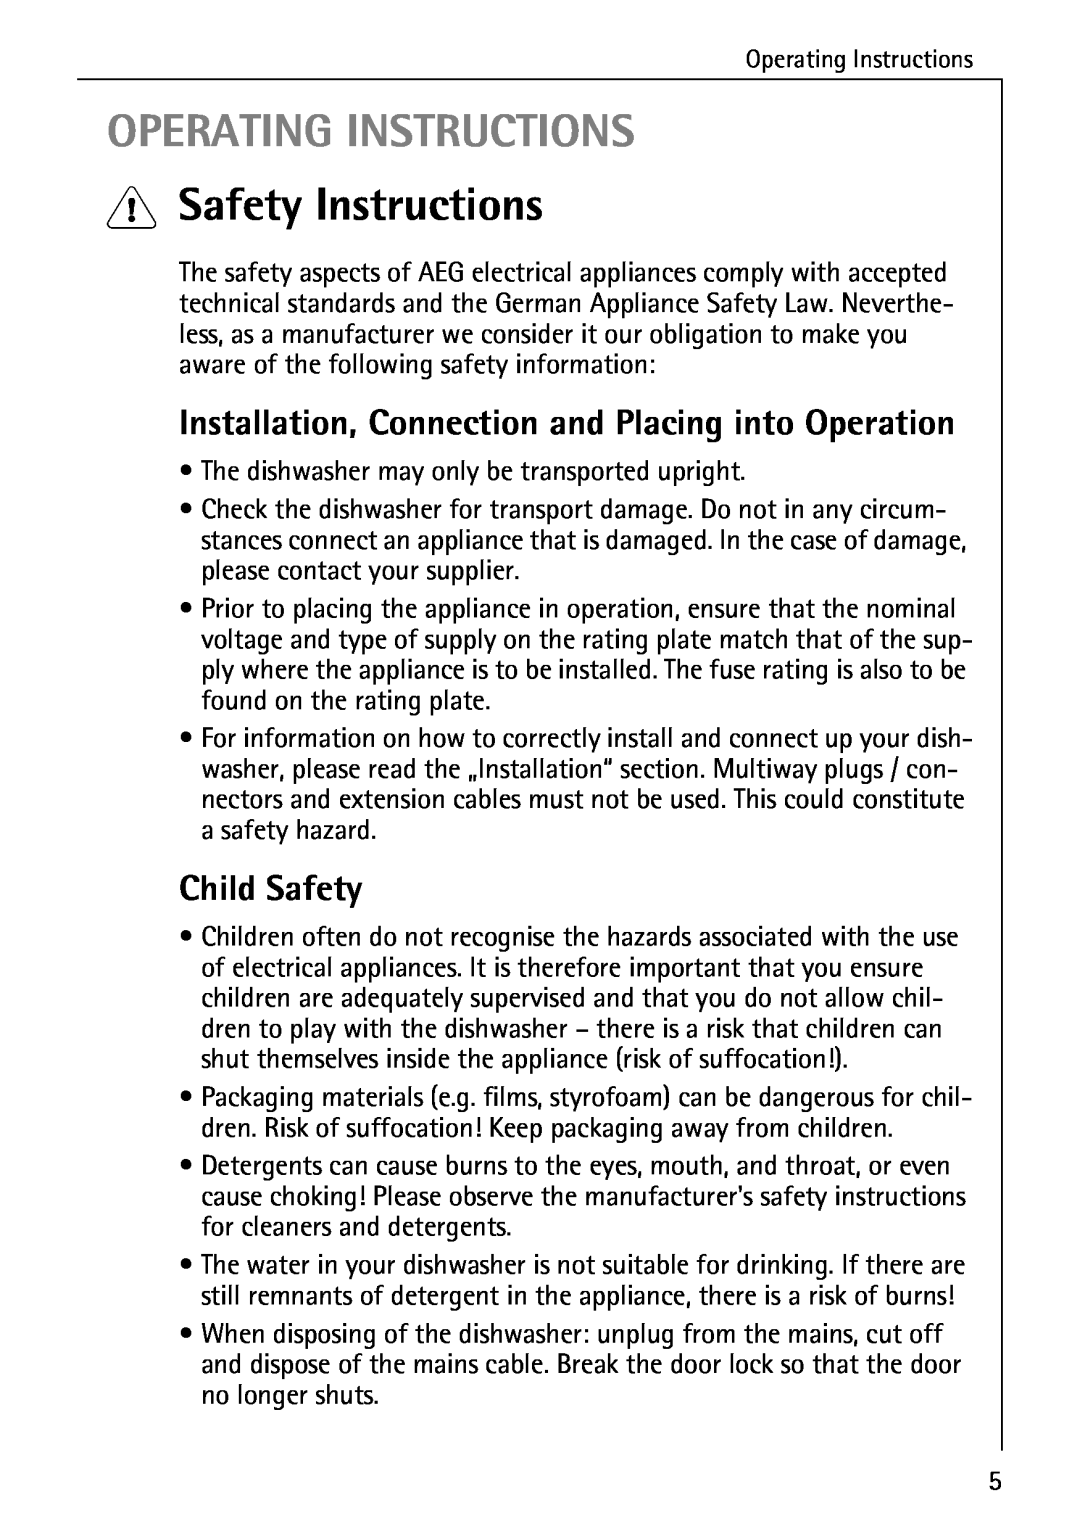 AEG 33060 I Operating Instructions, Safety Instructions, Installation, Connection and Placing into Operation, Child Safety 